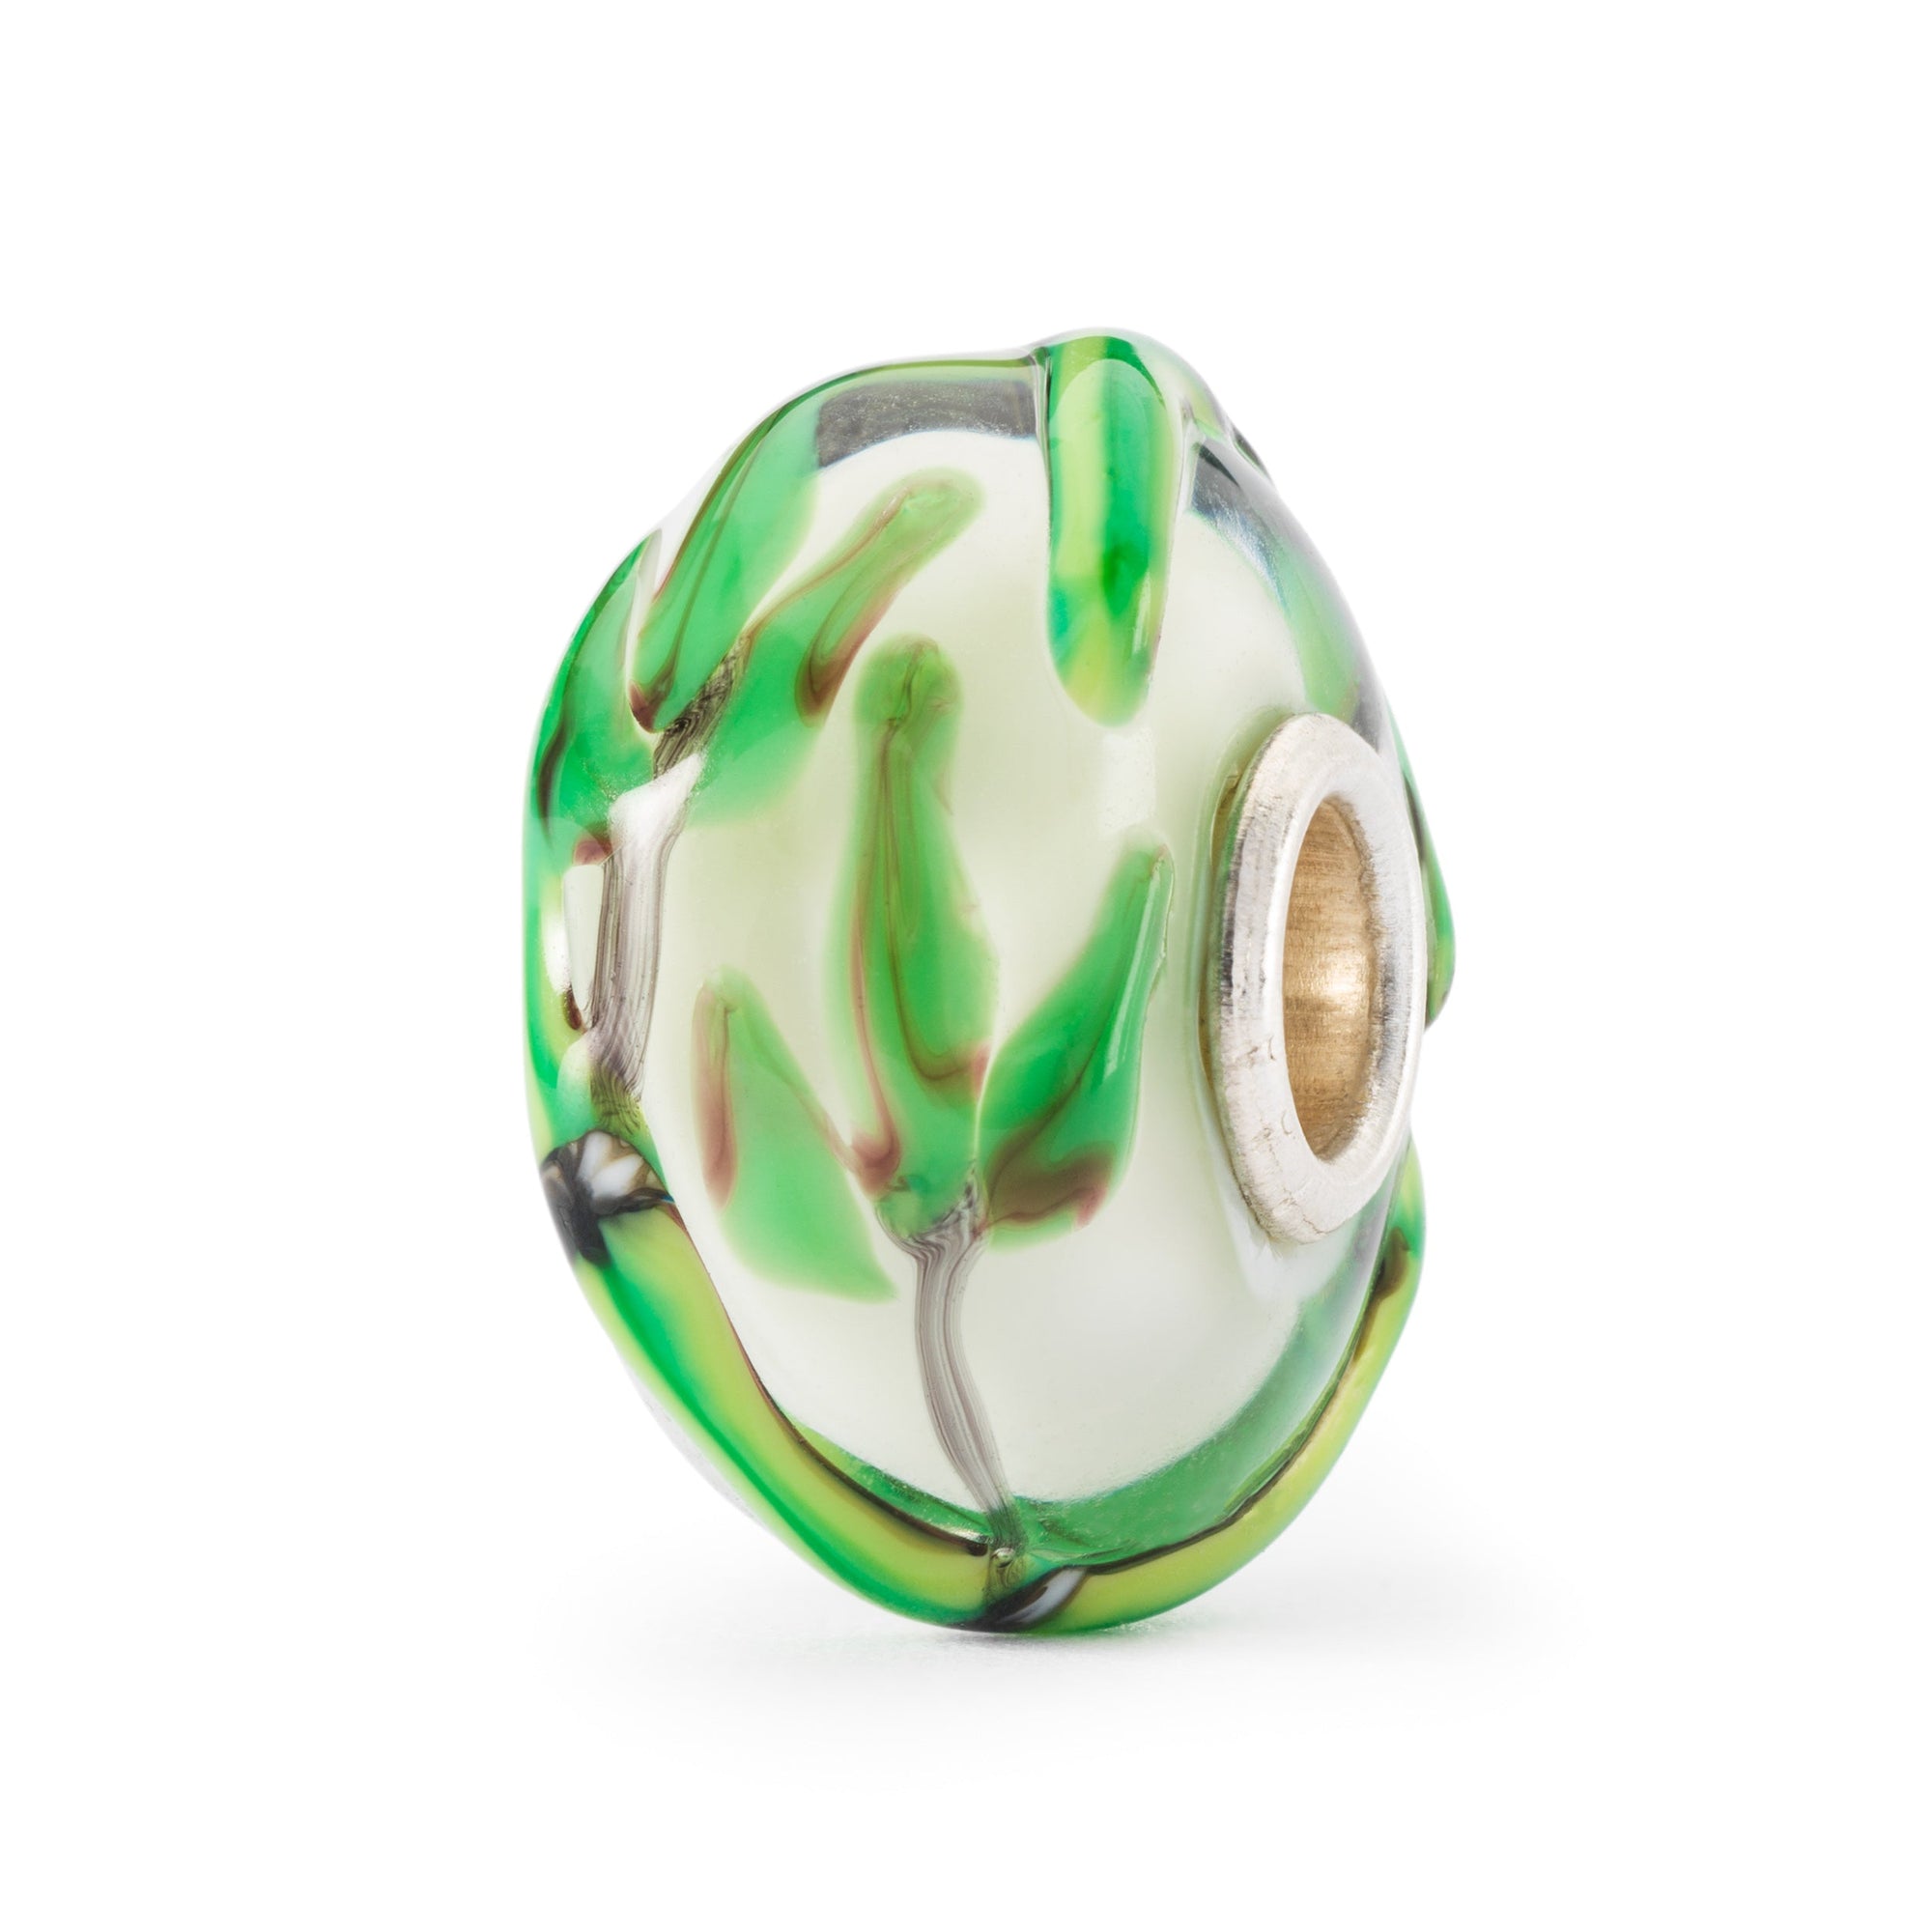 trollbeads seagrass glass bead with green reeds depicted in the glass